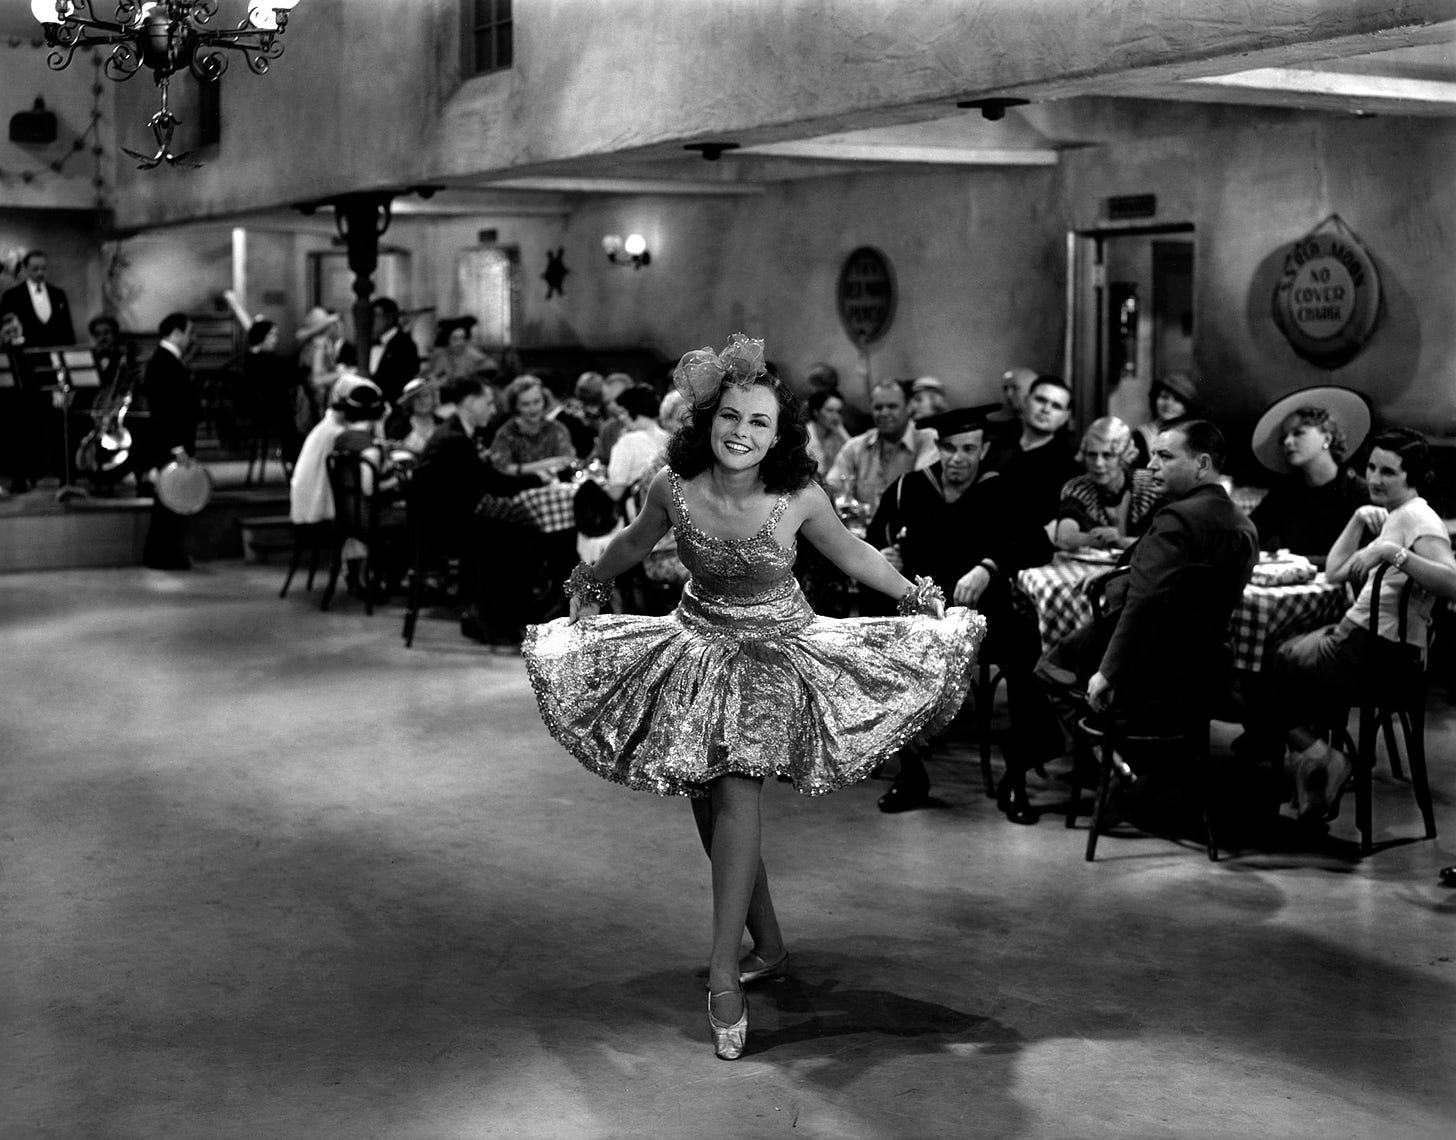 Paulette Goddard curtsies and smiles in a fabulous short gold dress on the dancefloor in the cafe she works in. Behind her an audience of diners at their tables